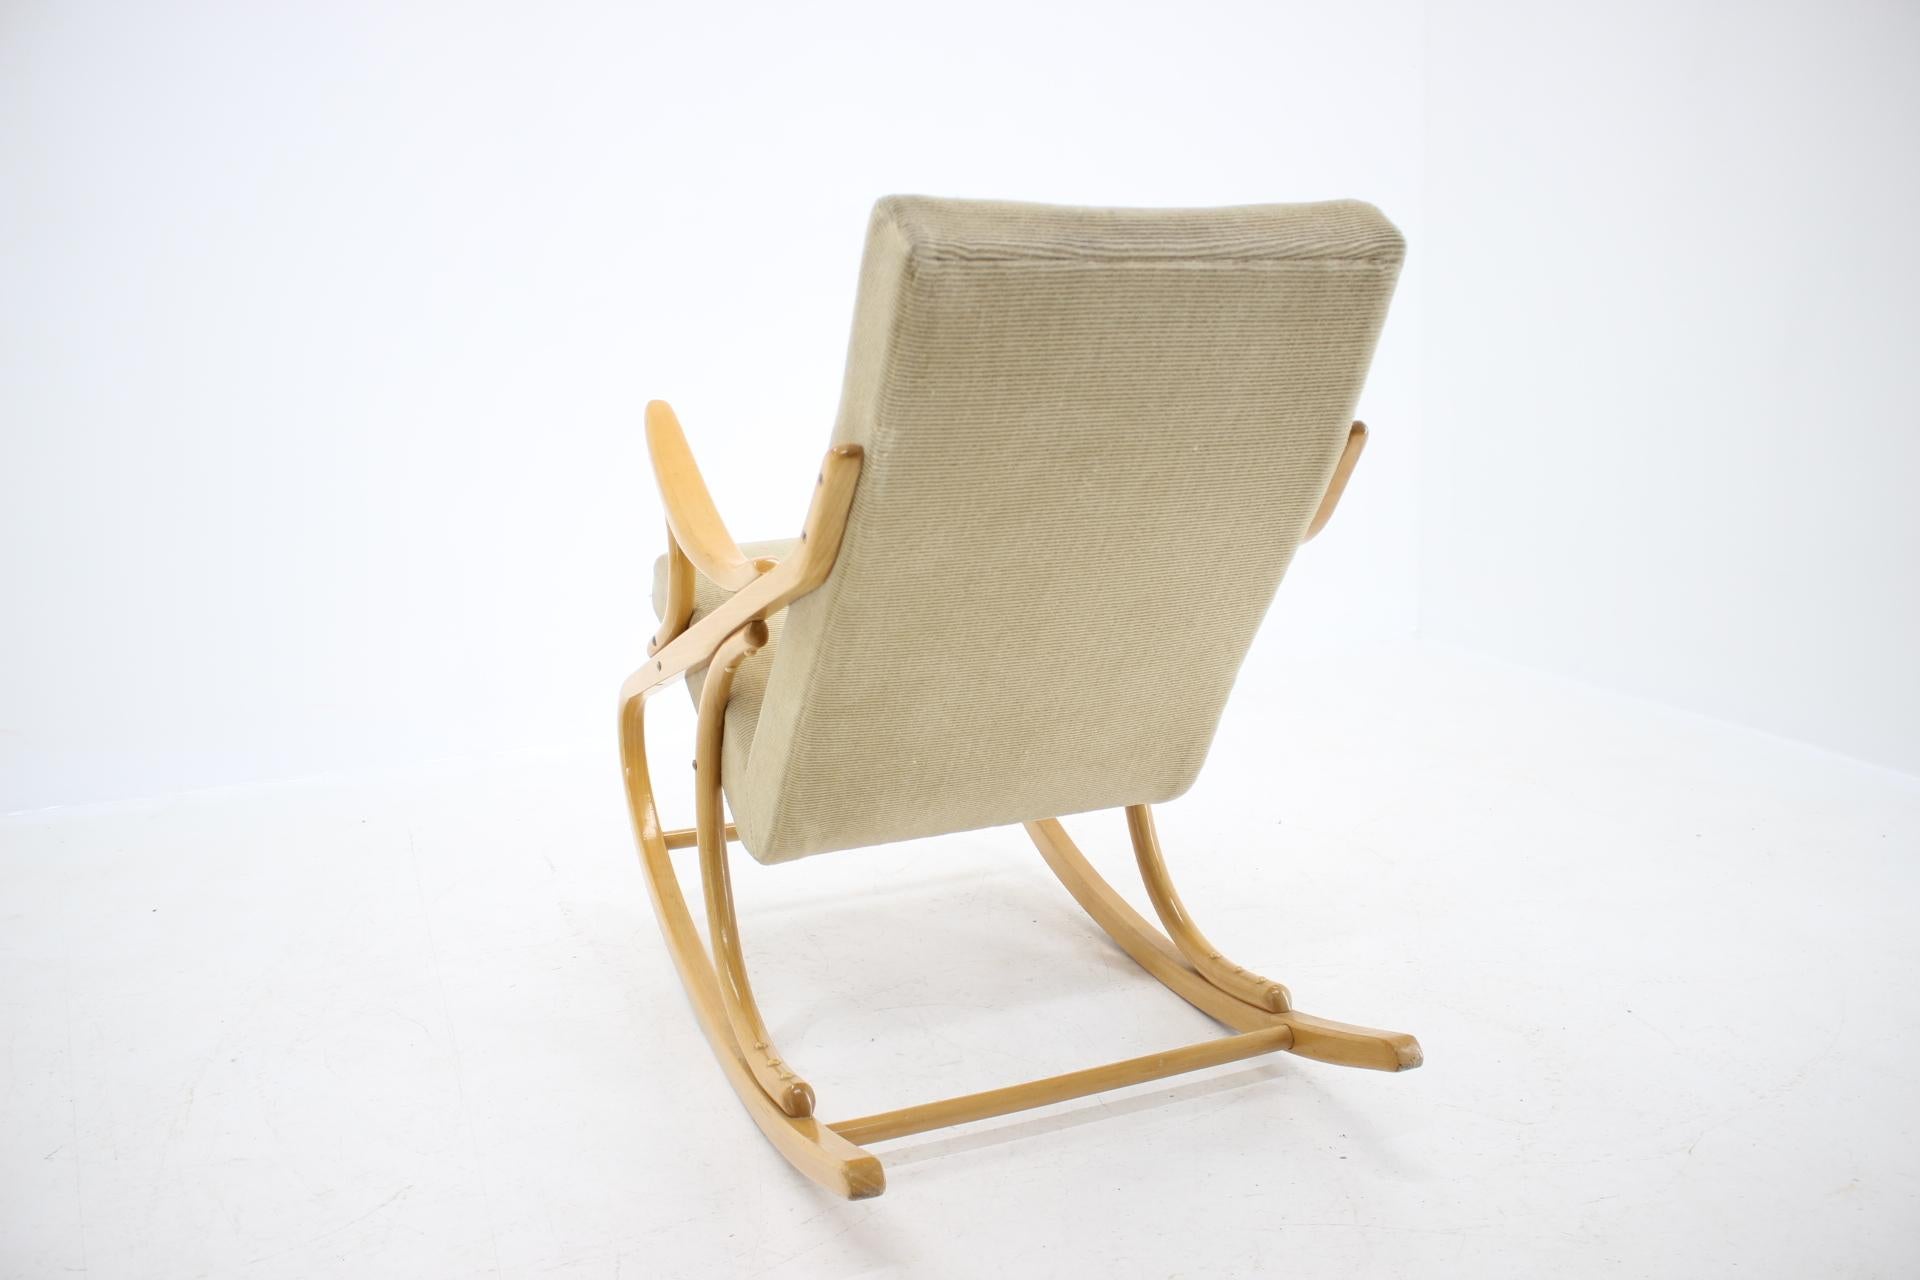 Iconic Midcentury Design Rocking Chair / Expo, 1958 In Good Condition For Sale In Praha, CZ